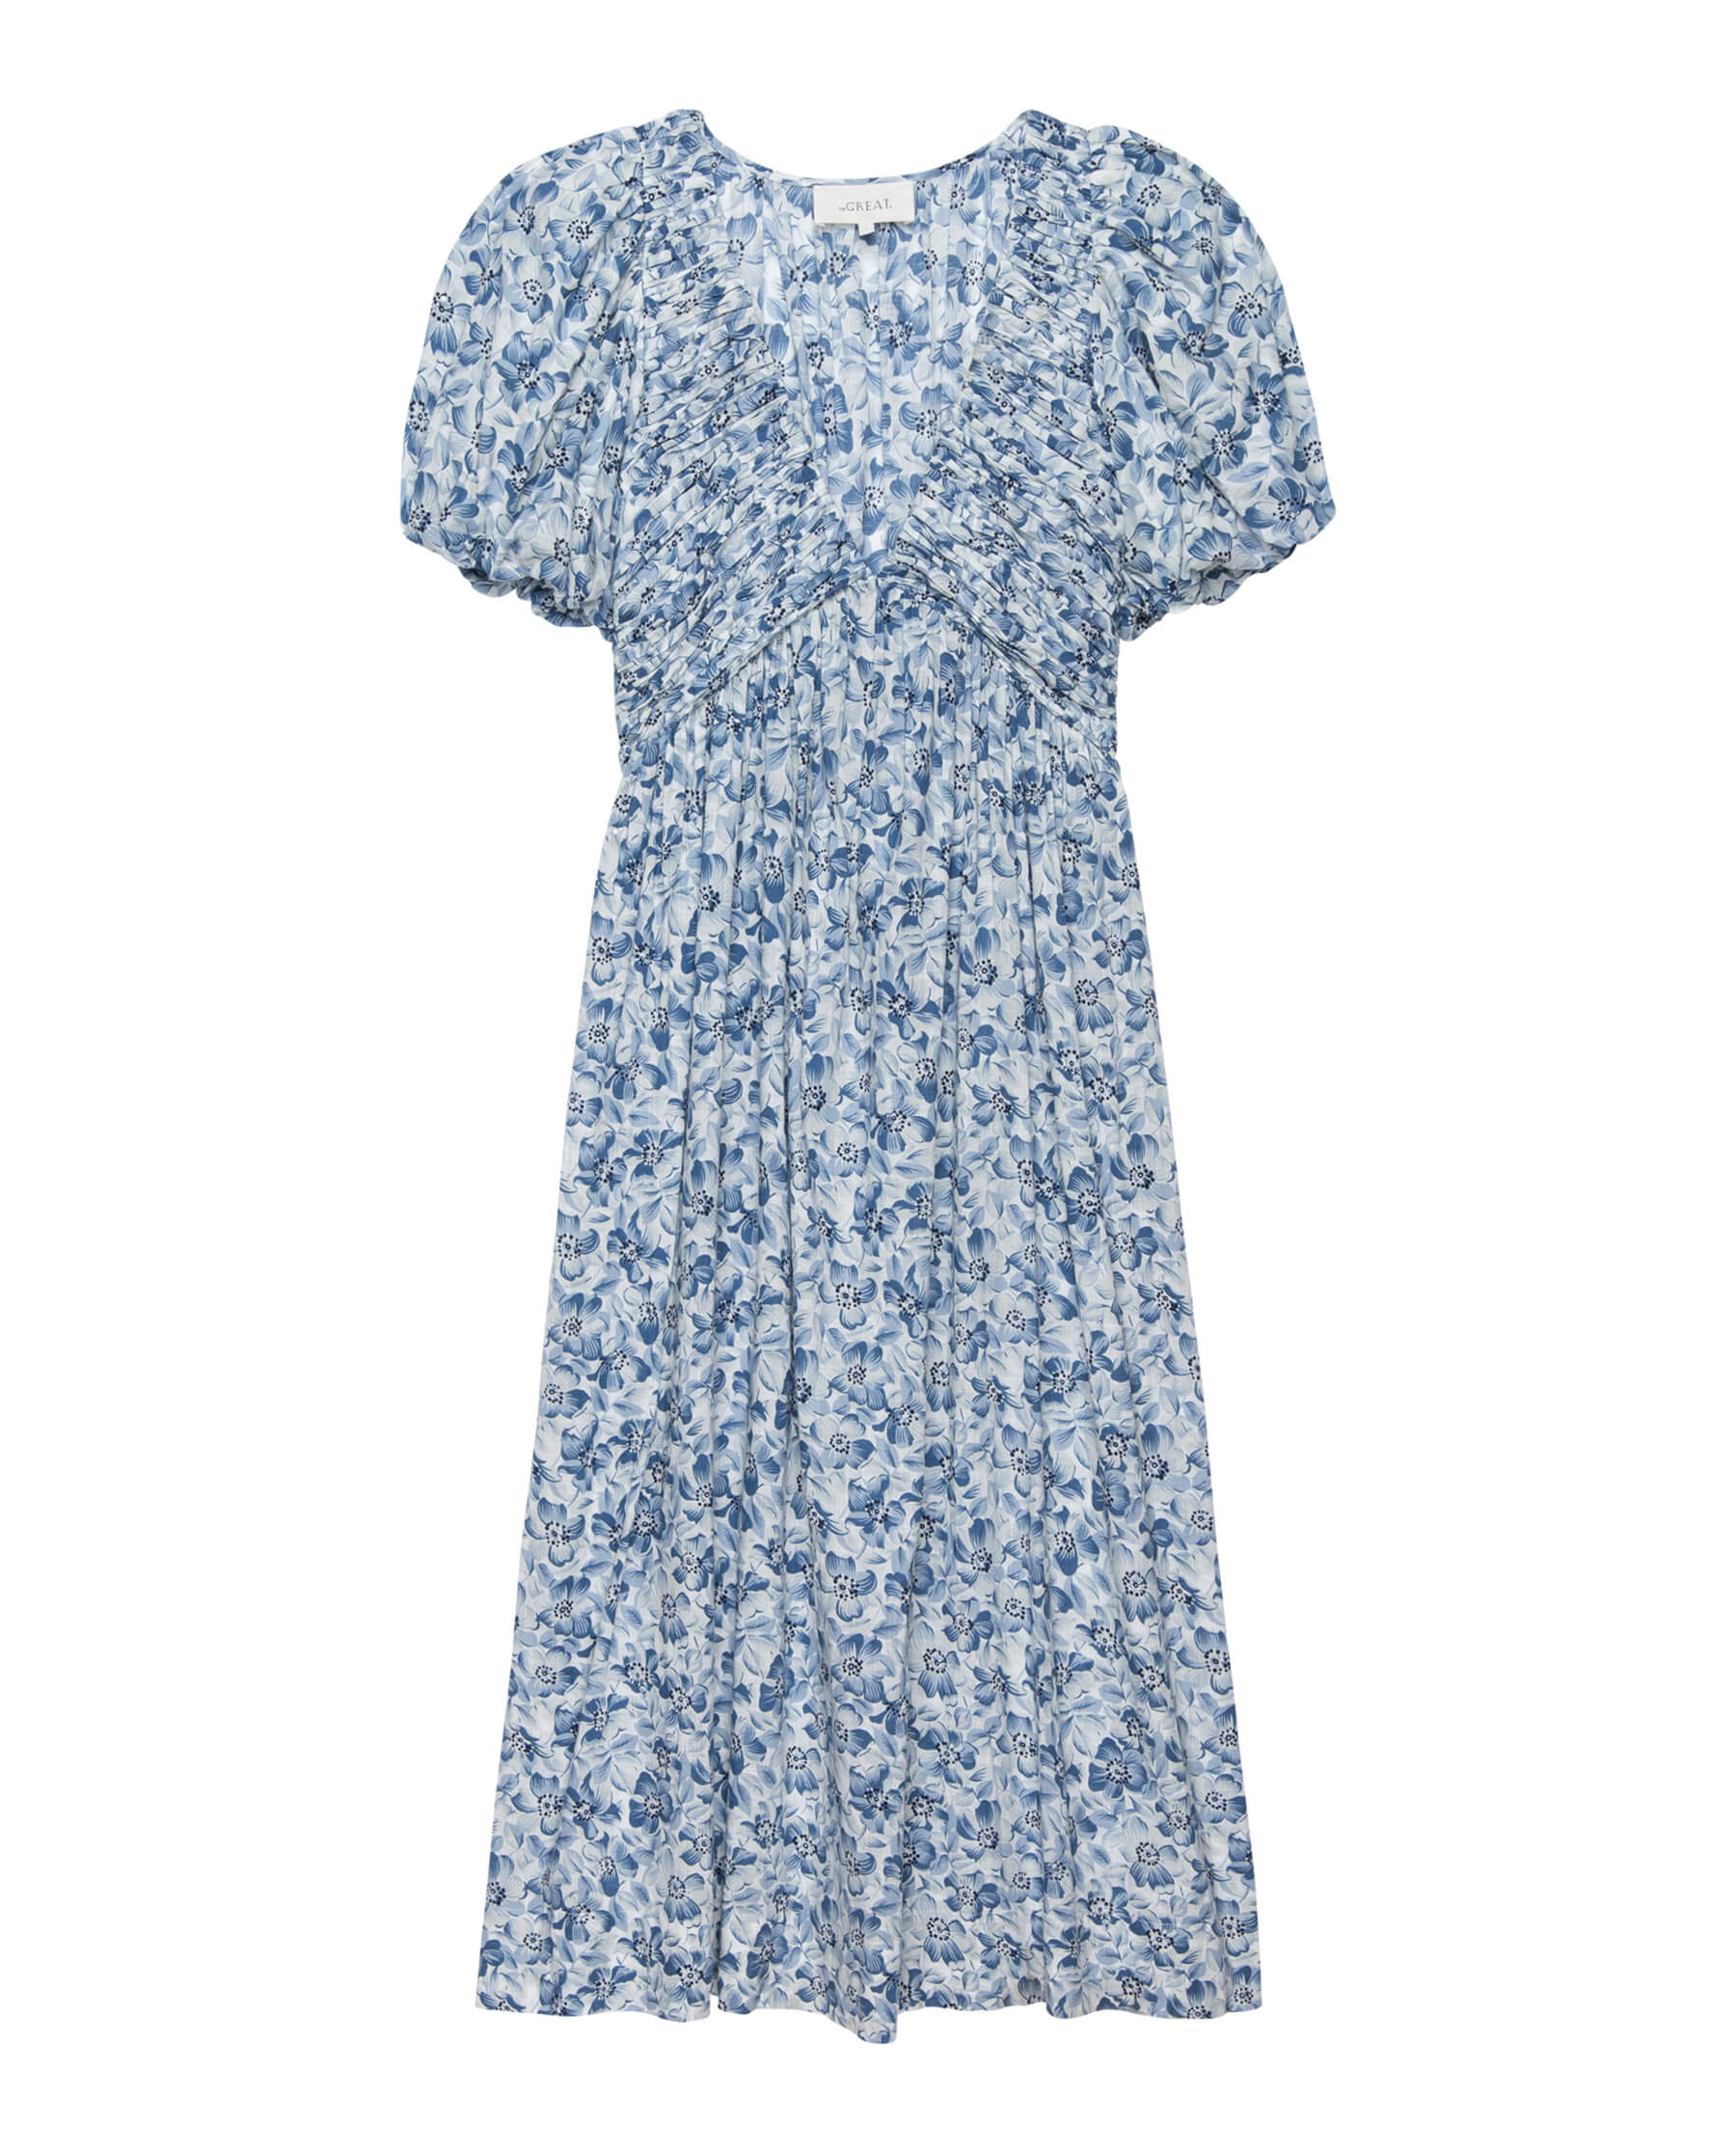 The Gallery Dress - Light Sky Pressed Floral Print